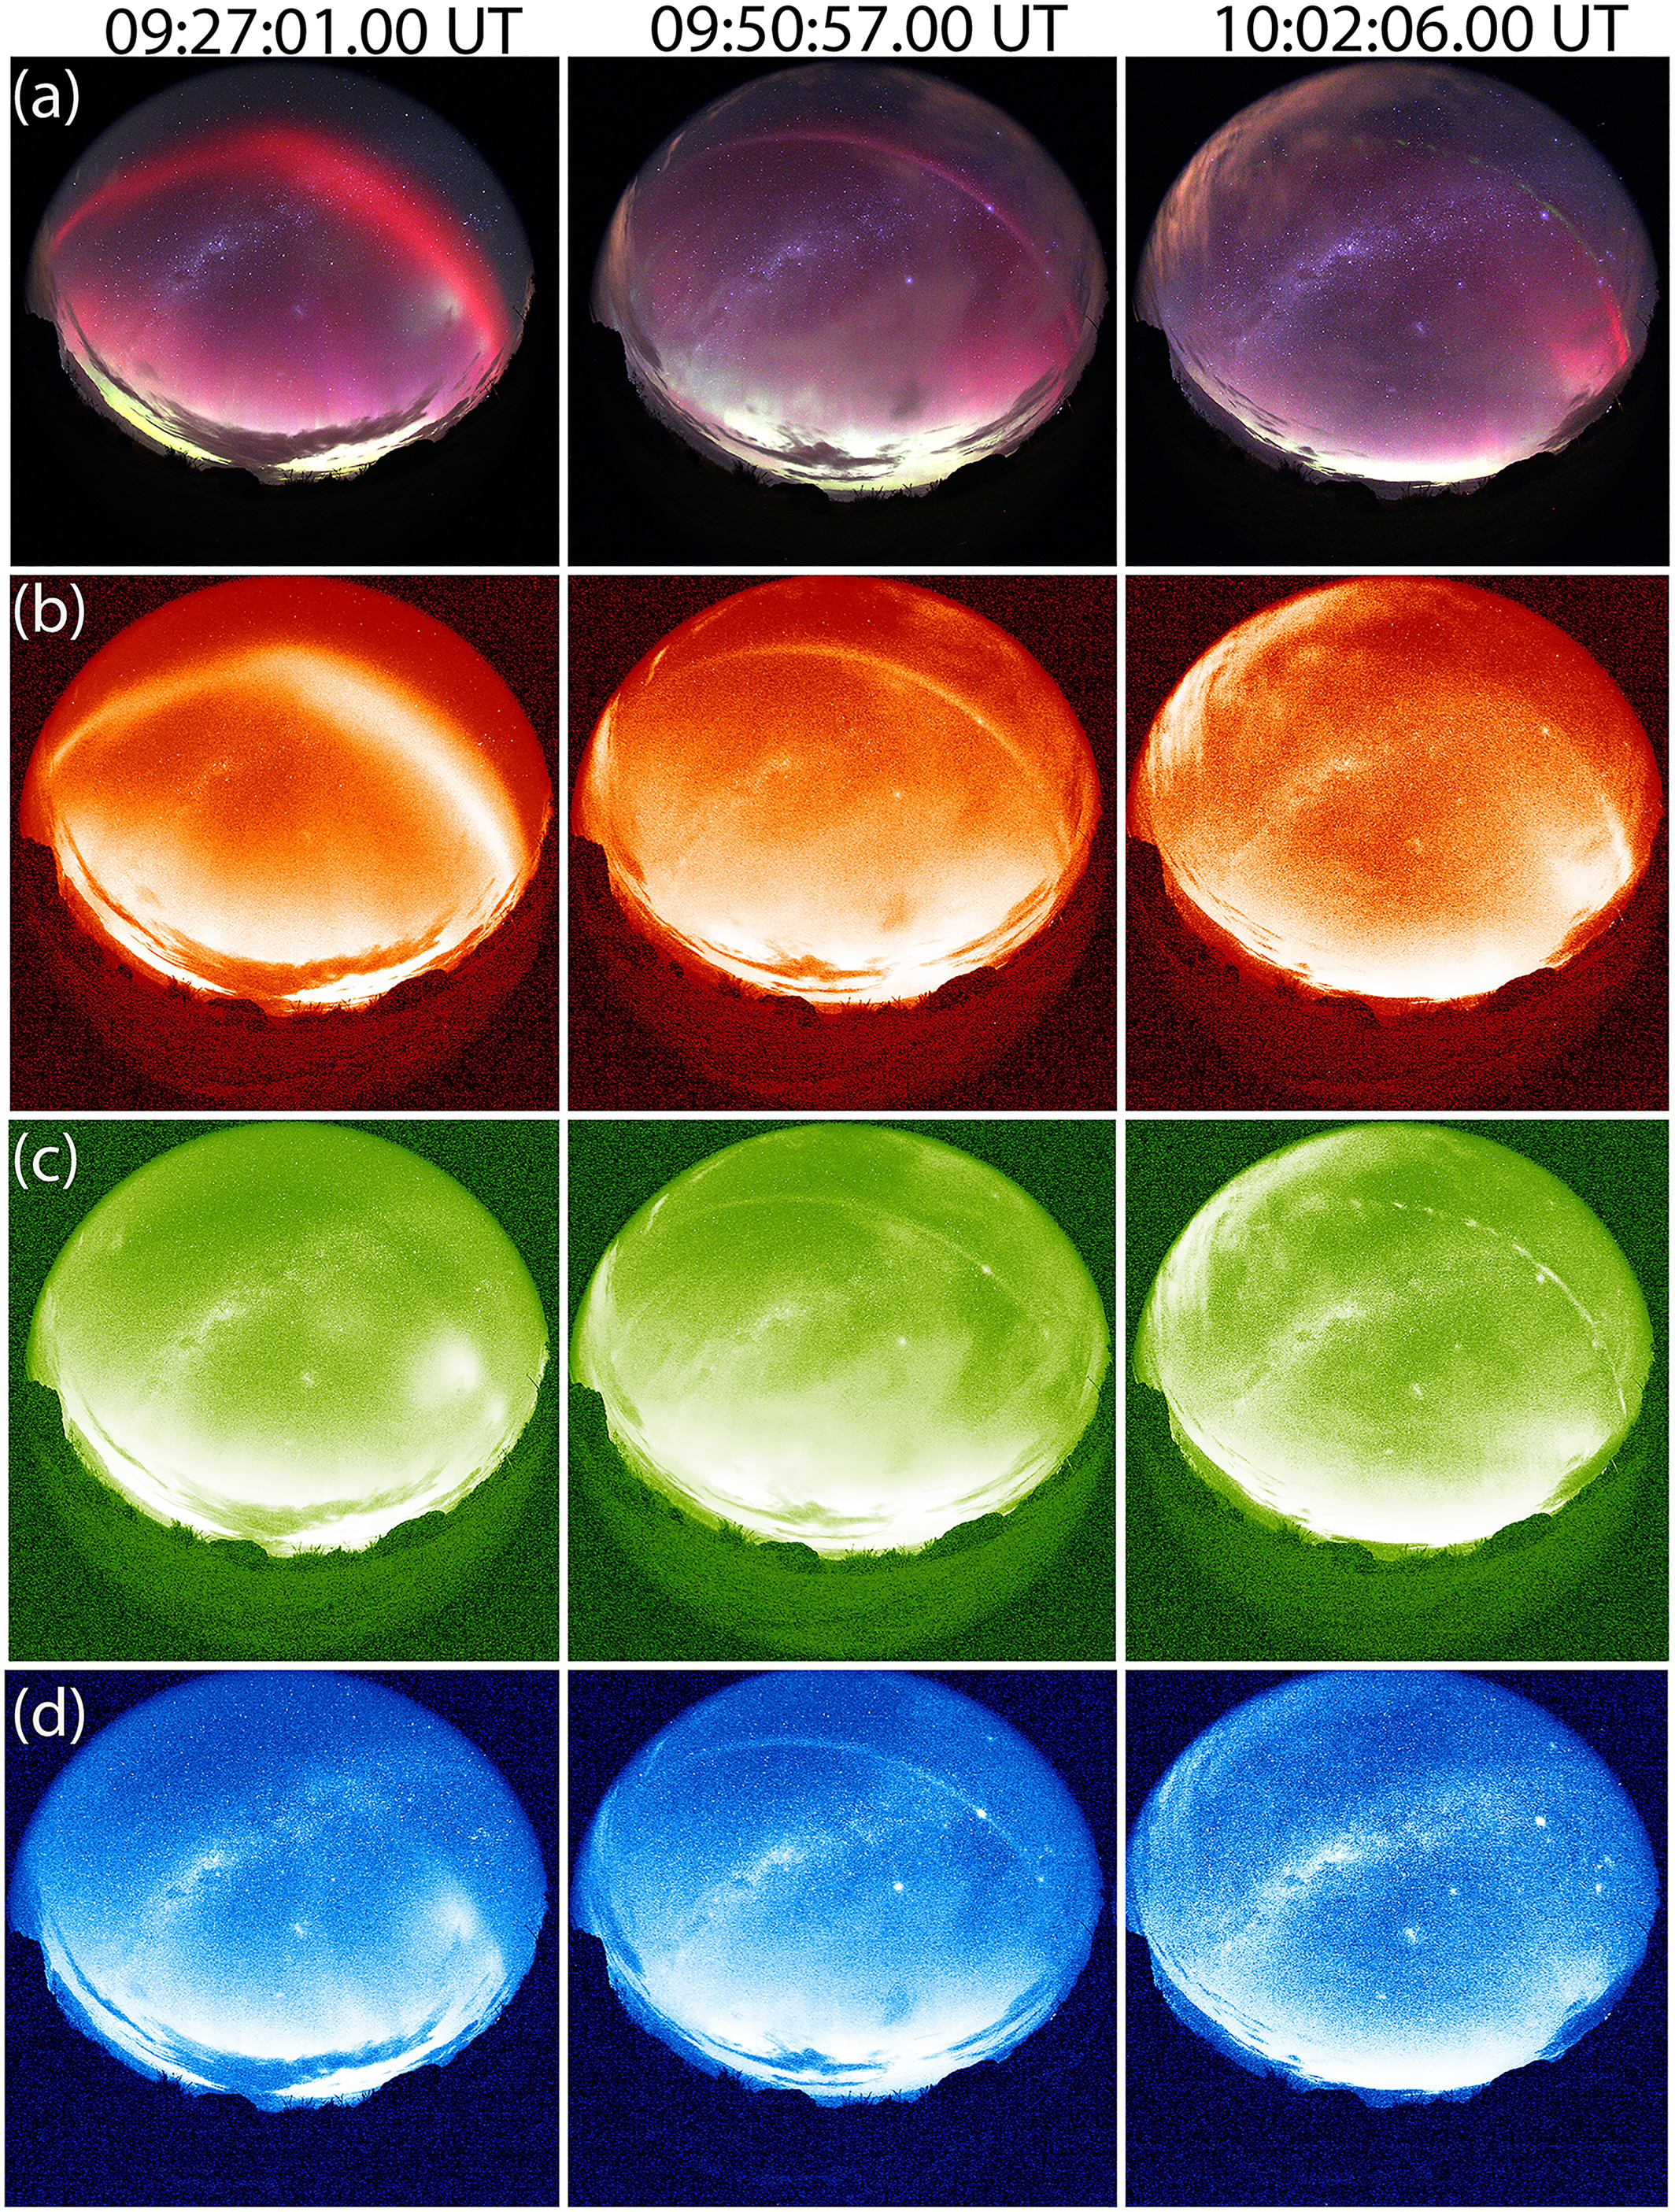 The complete set of auroral images, showing the auroral objects through a range of color filters.